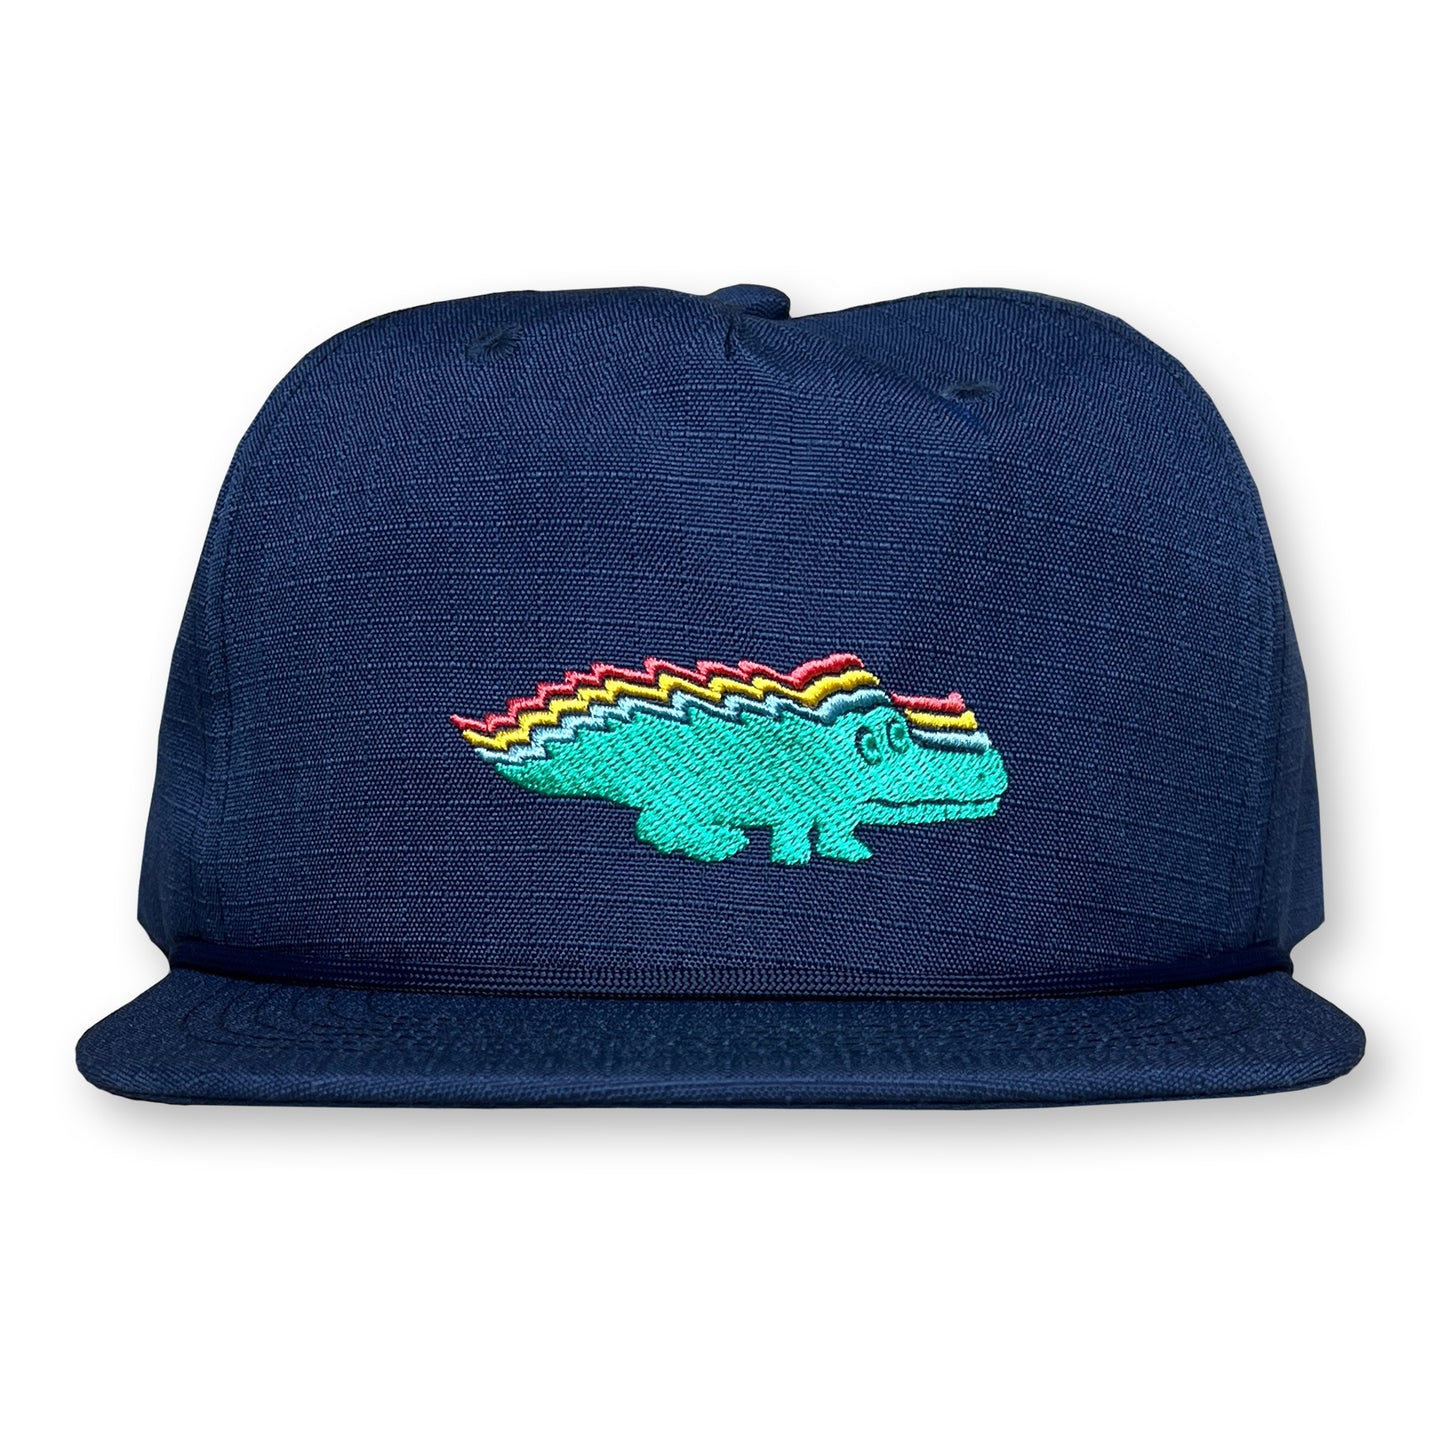 King Gizzard Rope Hat / Navy Ripstop Nylon with Phthalo Gator